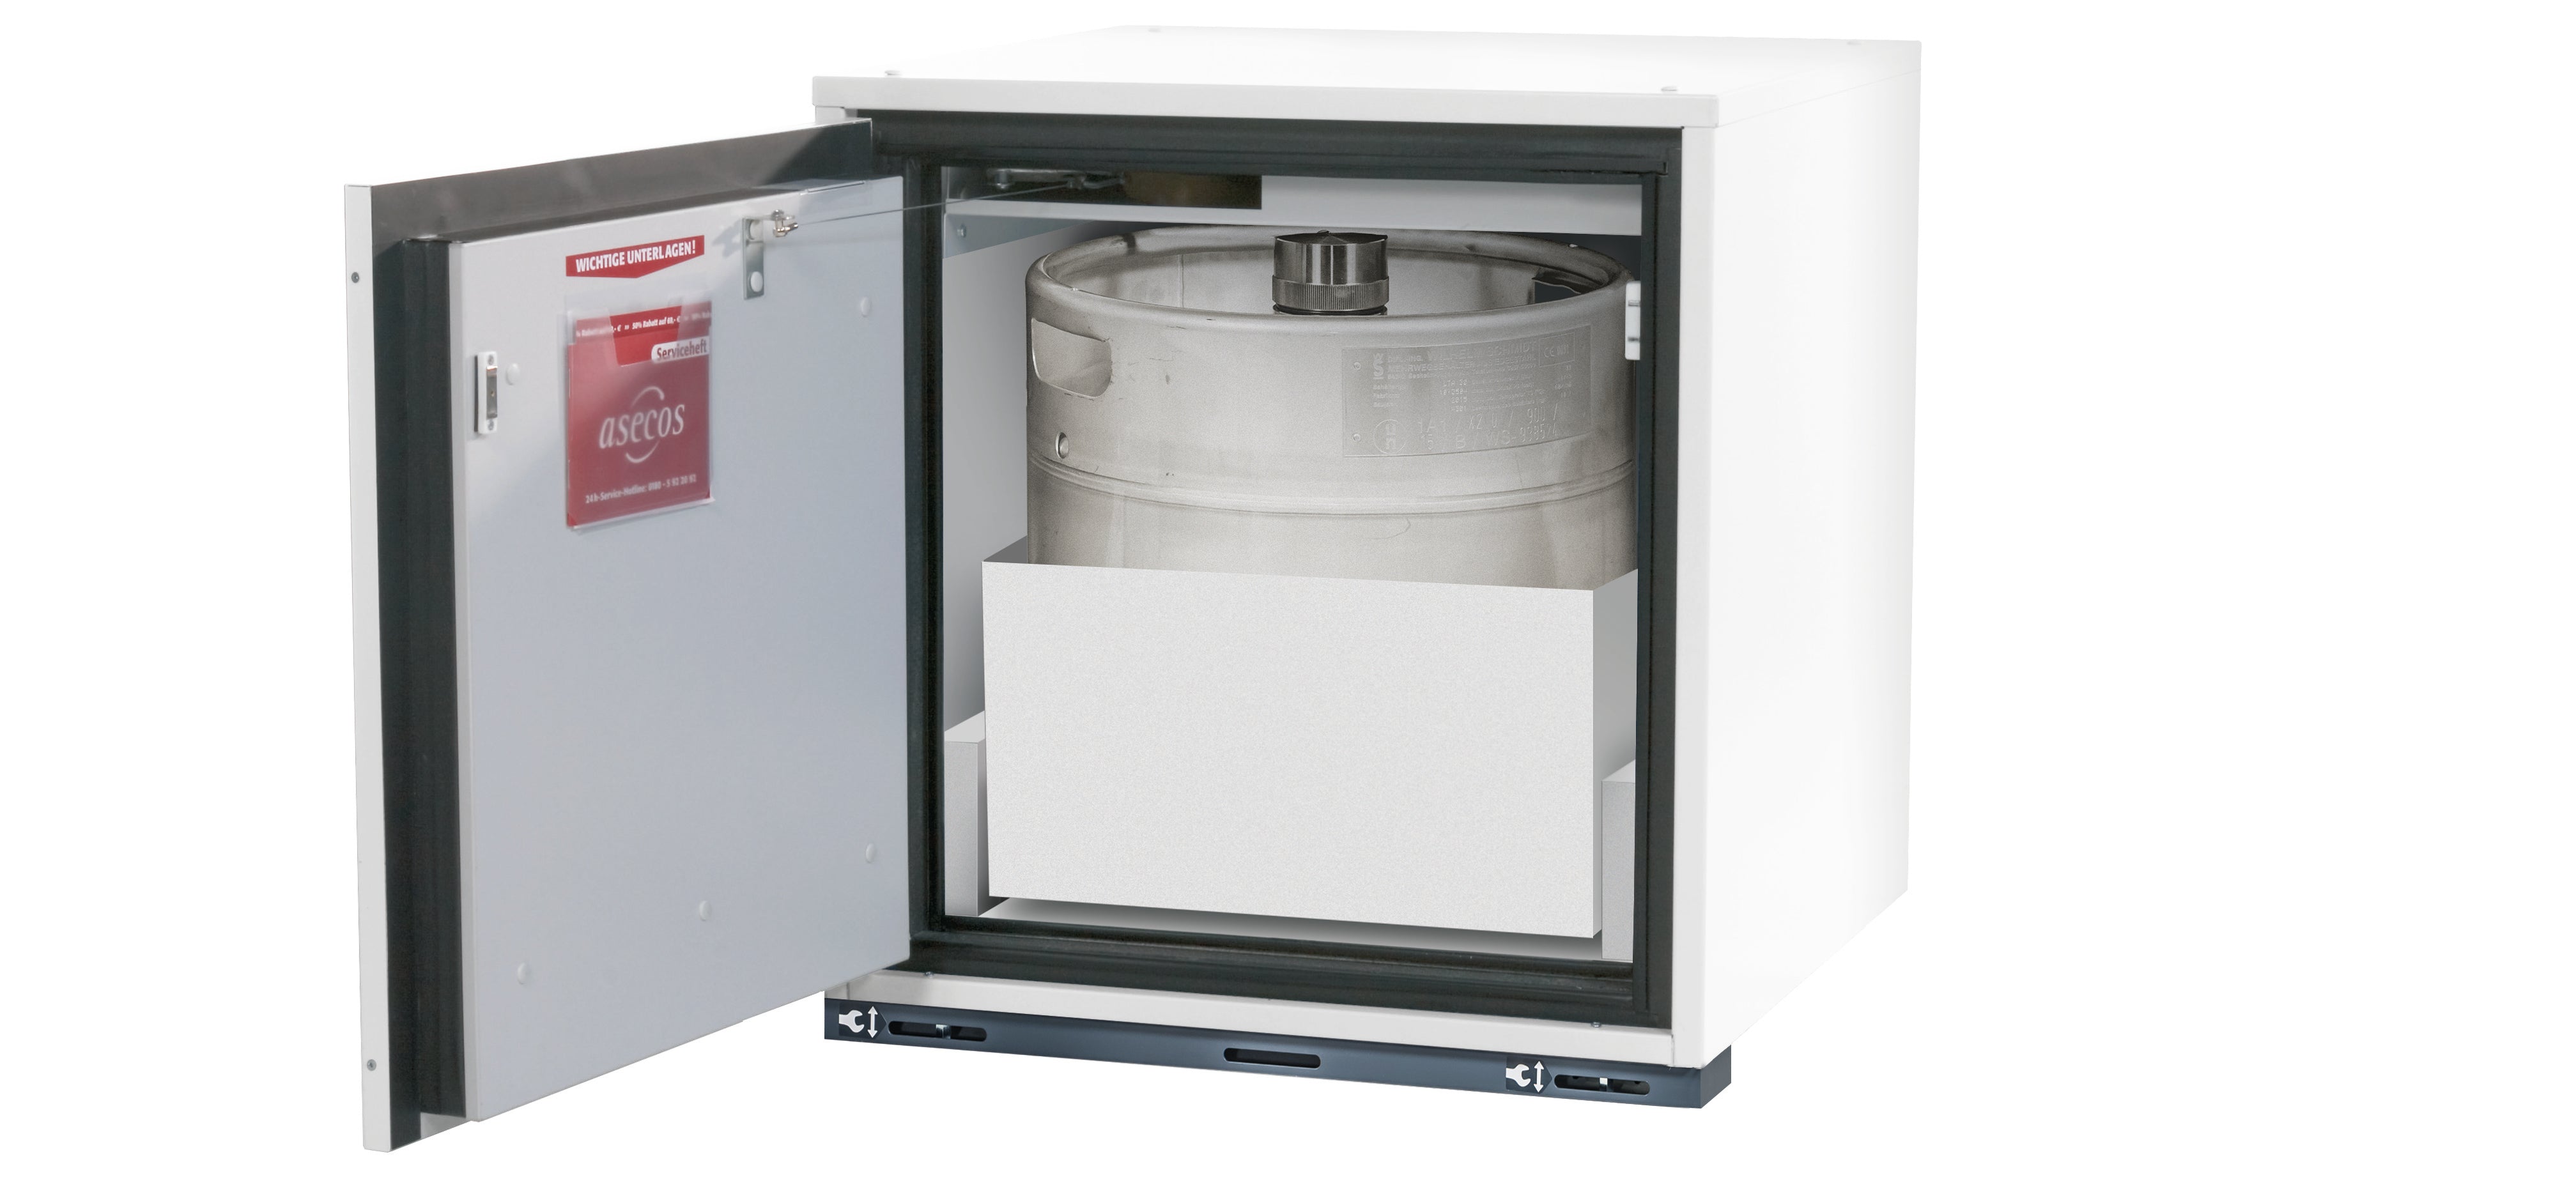 Type 90 safety base cabinet UB-T-90 model UB90.060.059.T in laboratory white (similar to RAL 9016) with 1x pull-out tray STAWA-R max. interior height (sheet steel)